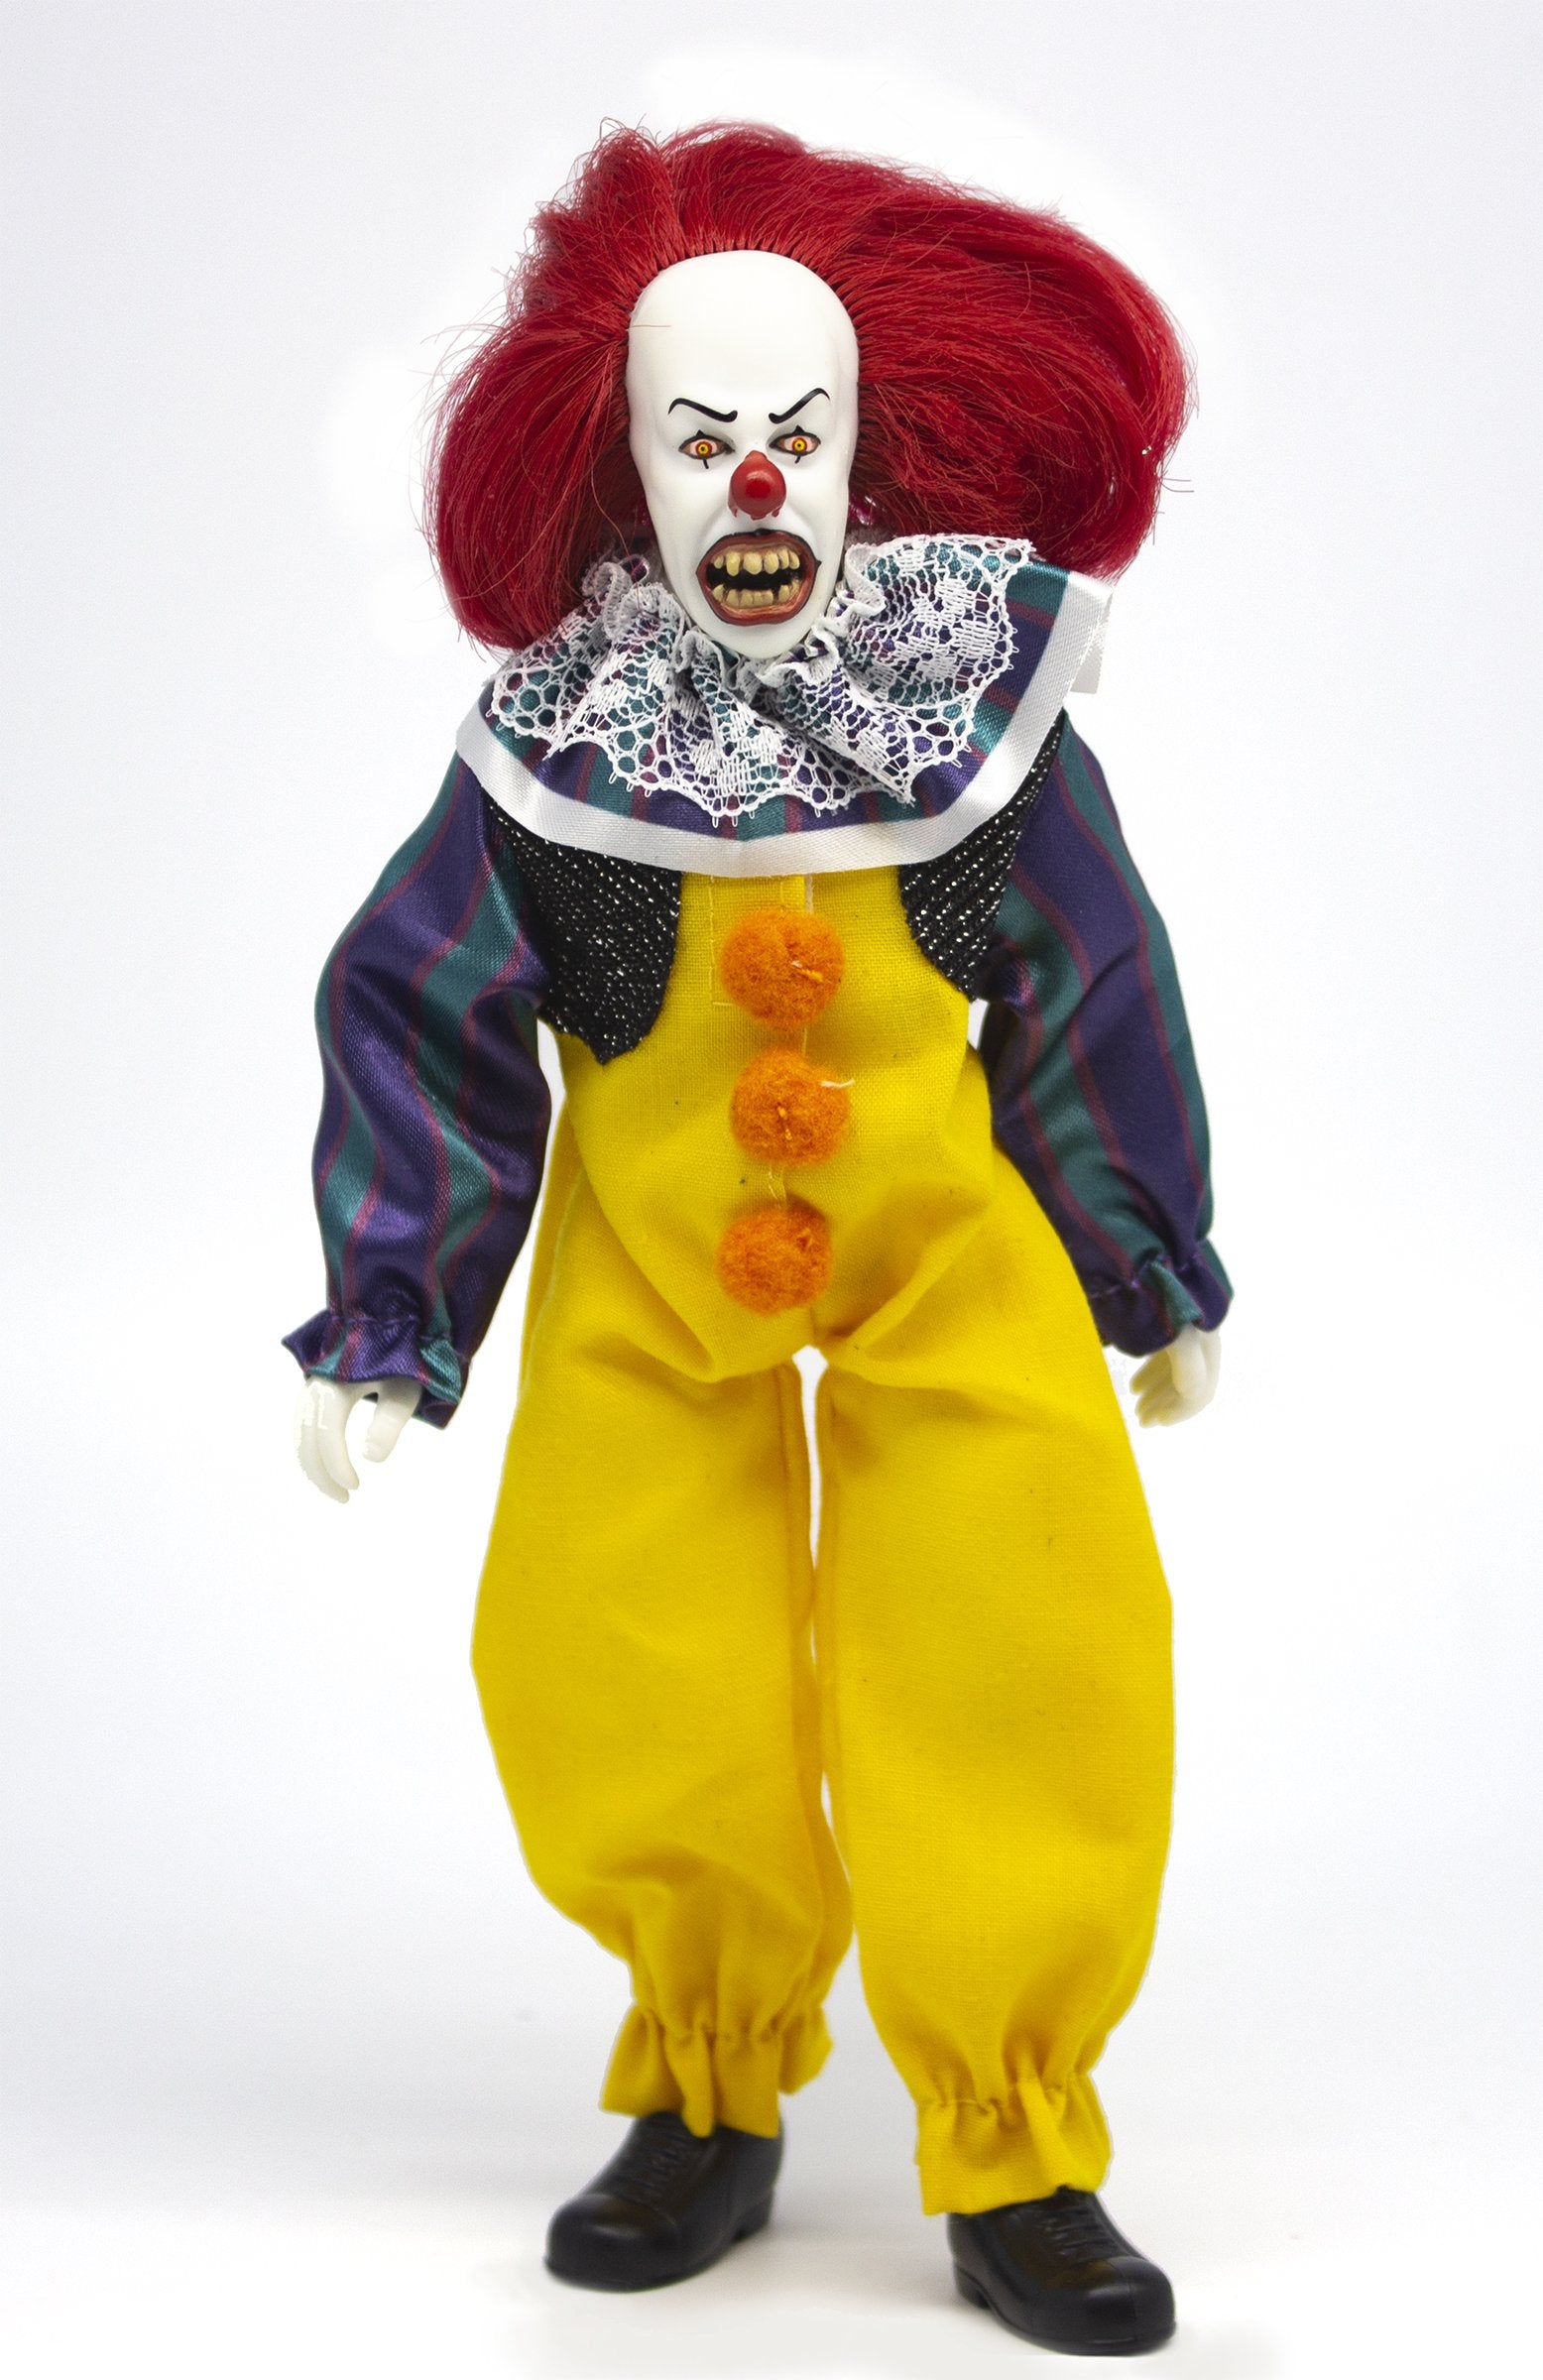 Mego Horror Wave 7 - It Pennywise 8" Action Figure - Zlc Collectibles